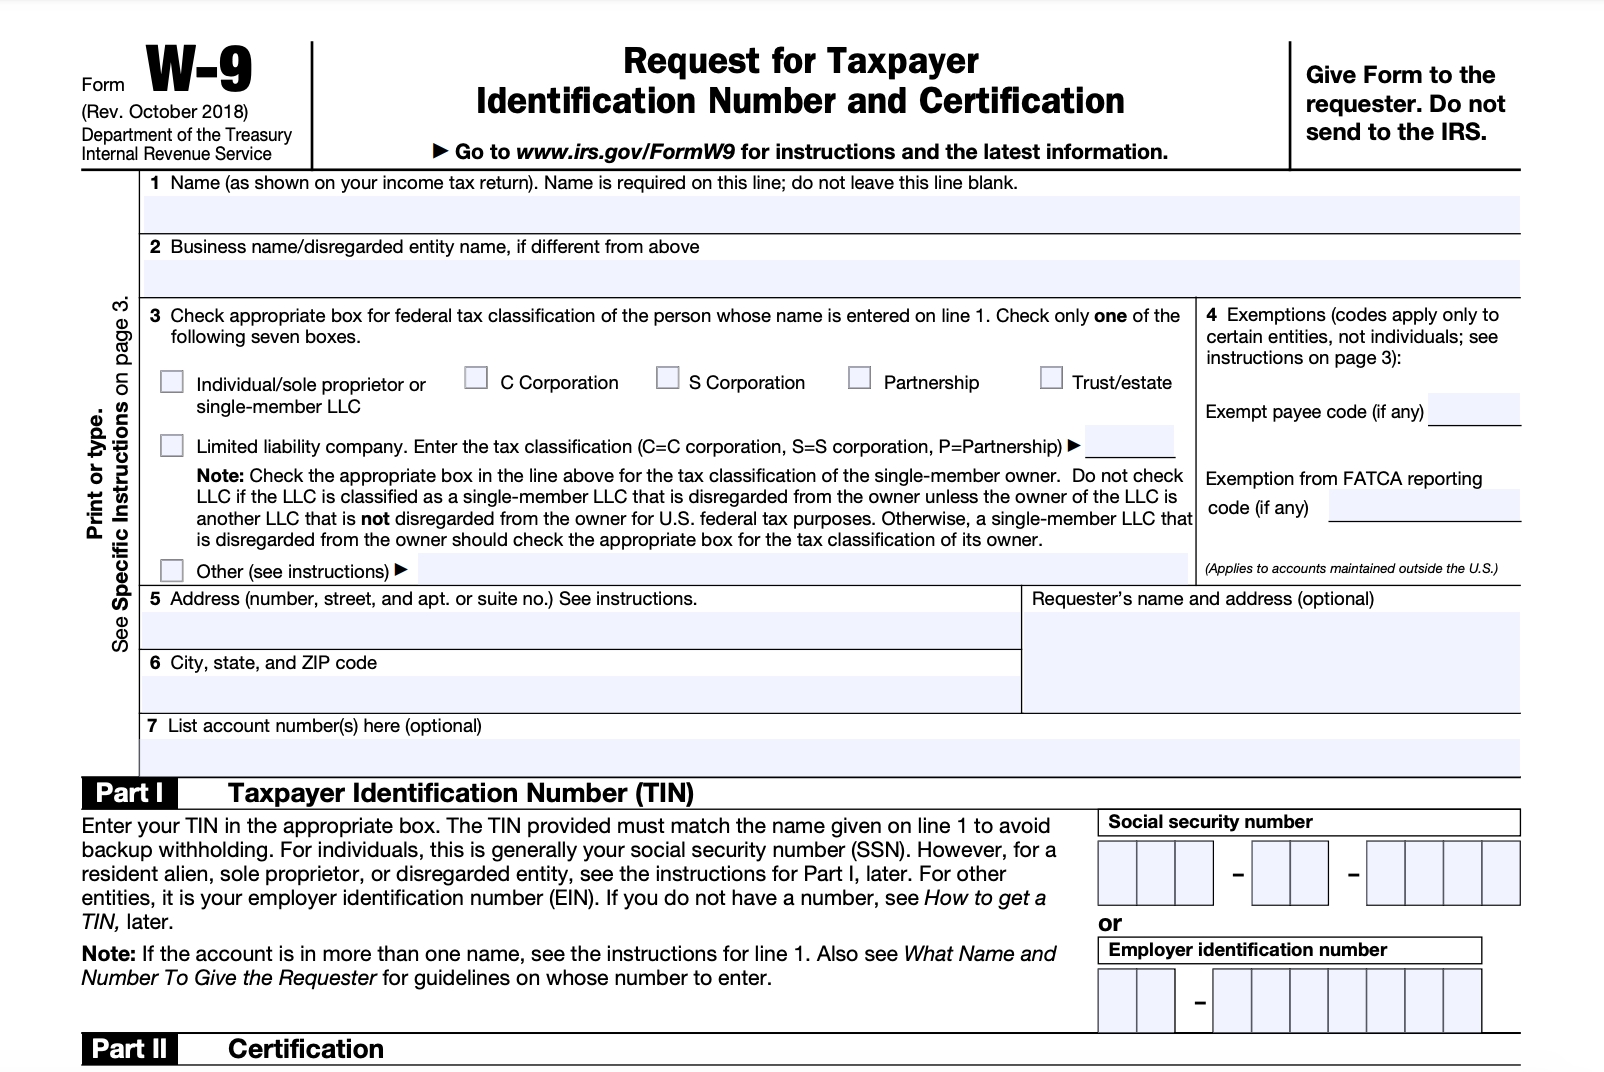 W-9 Form - Fill Out The Irs W-9 Form Online For 2019 | Smallpdf-Blank Irs Forms To Print